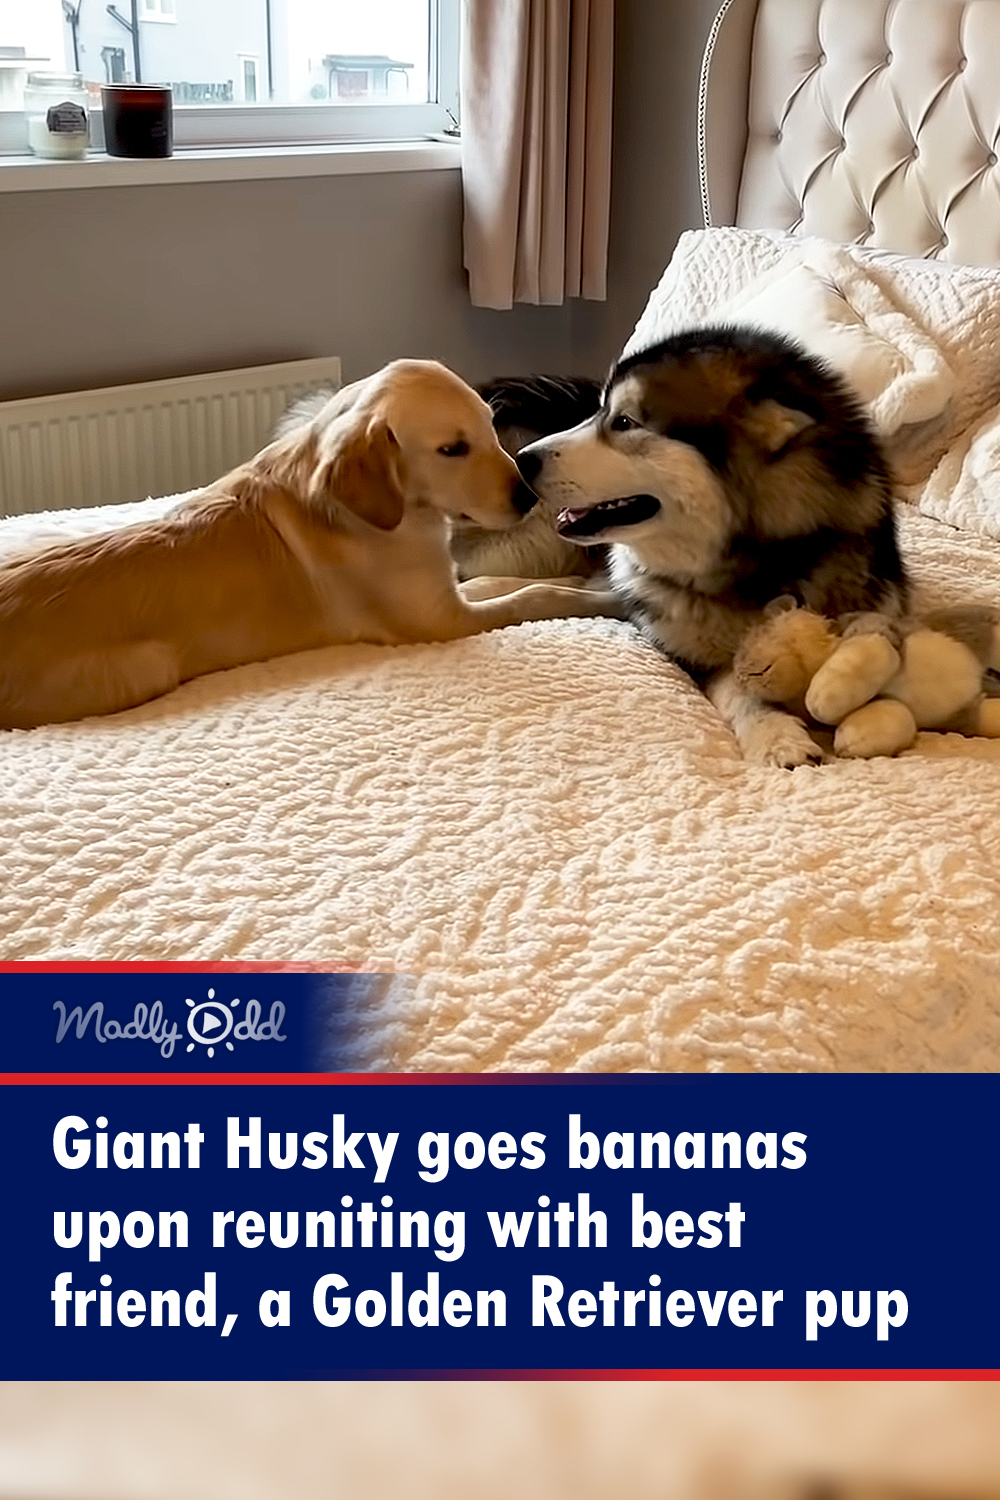 Giant Husky goes bananas upon reuniting with best friend, a Golden Retriever pup